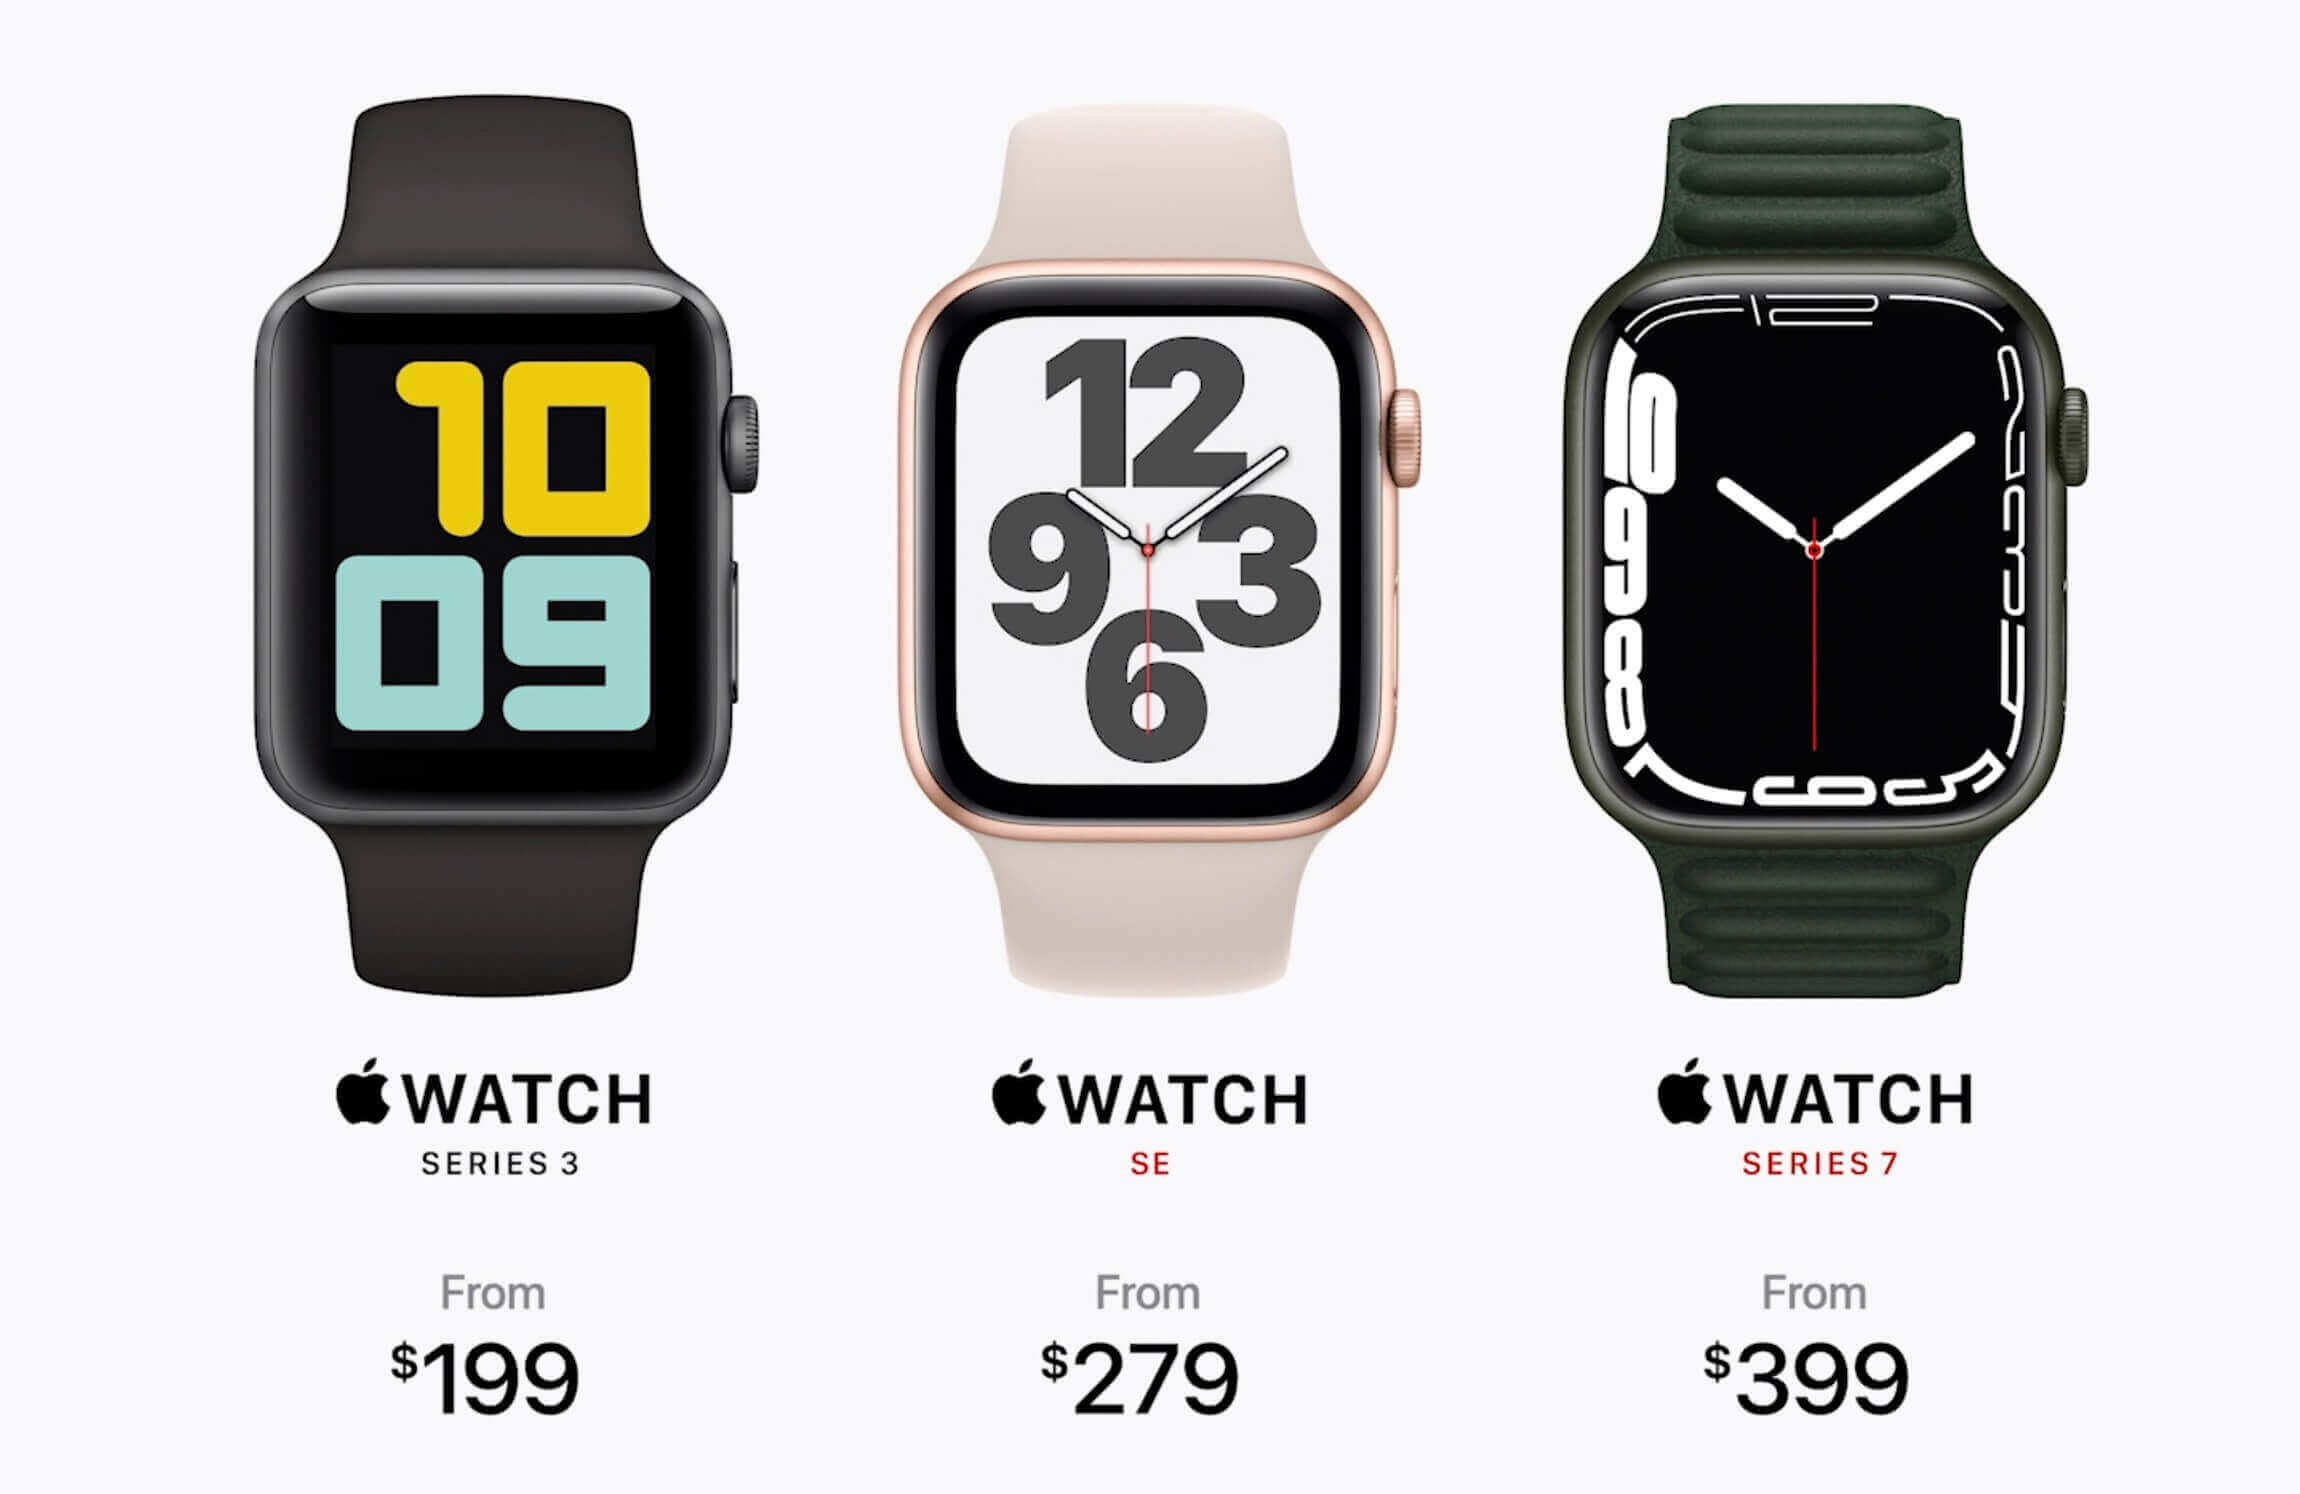 priceapplewatch